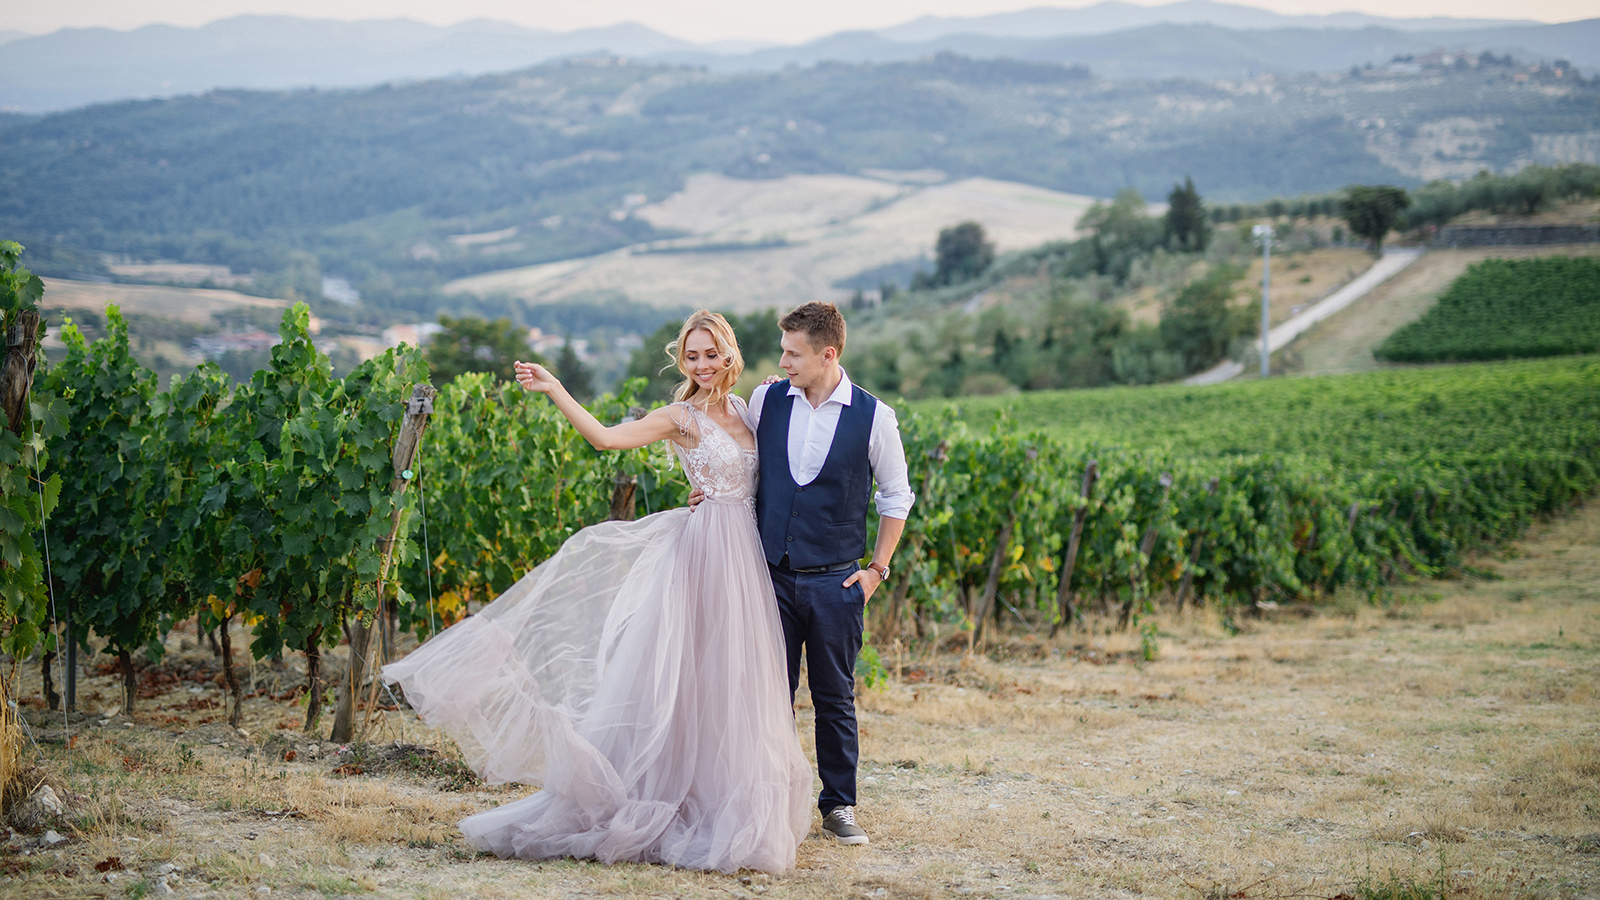 young beautiful wedding couple walking at sunset in Tuscany in Italy near the vineyards bride in beautiful dress groom stylishly dressed